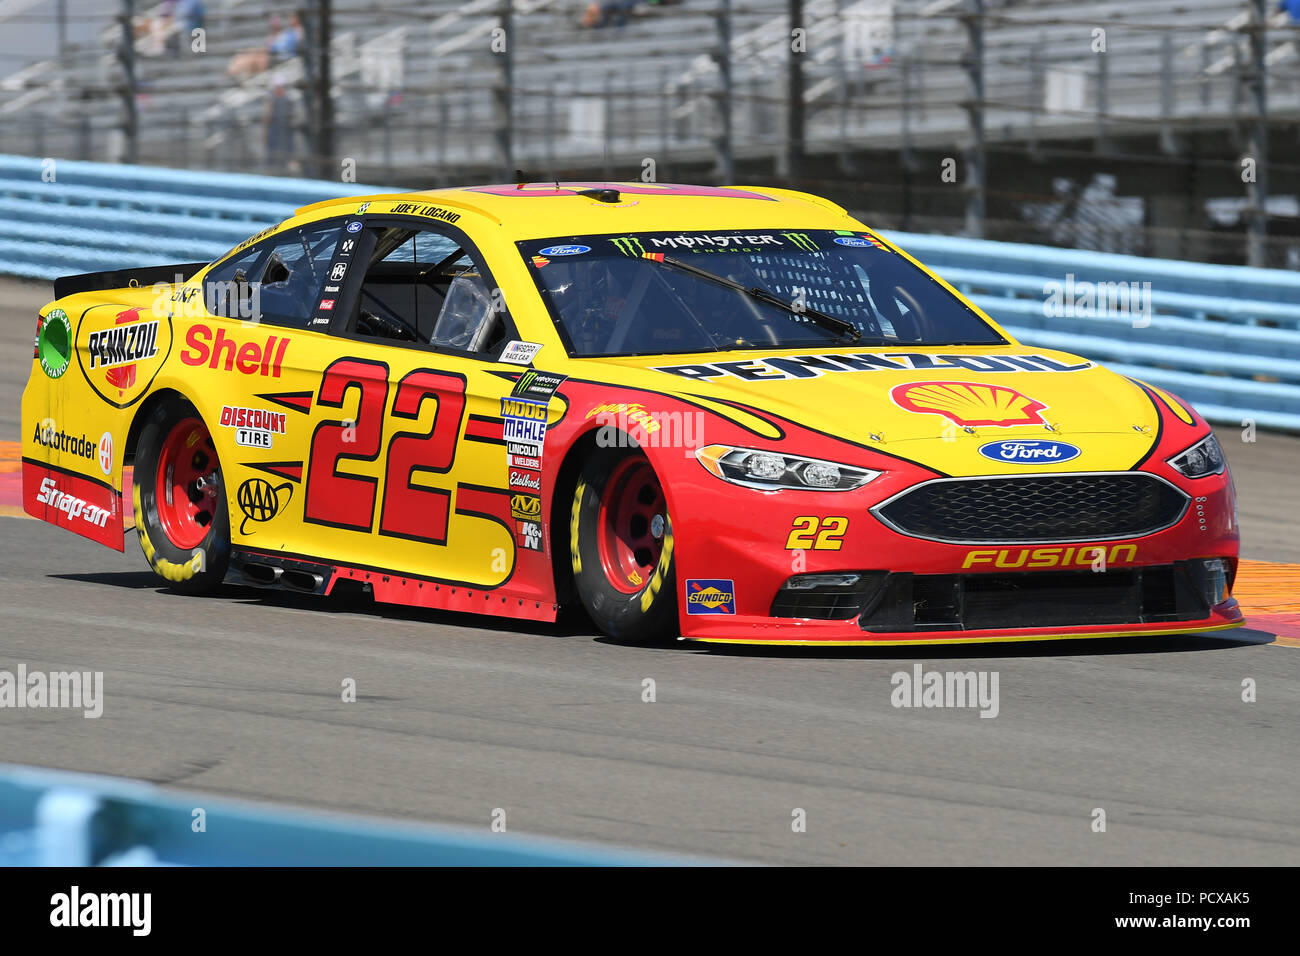 August 4, 2018: Monster Energy NASCAR Cup Series driver Joey Logano #22  during practice for the Monster Energy NASCAR Cup Series Go Bowling at The  Glen on Saturday, August 4, 2018 at